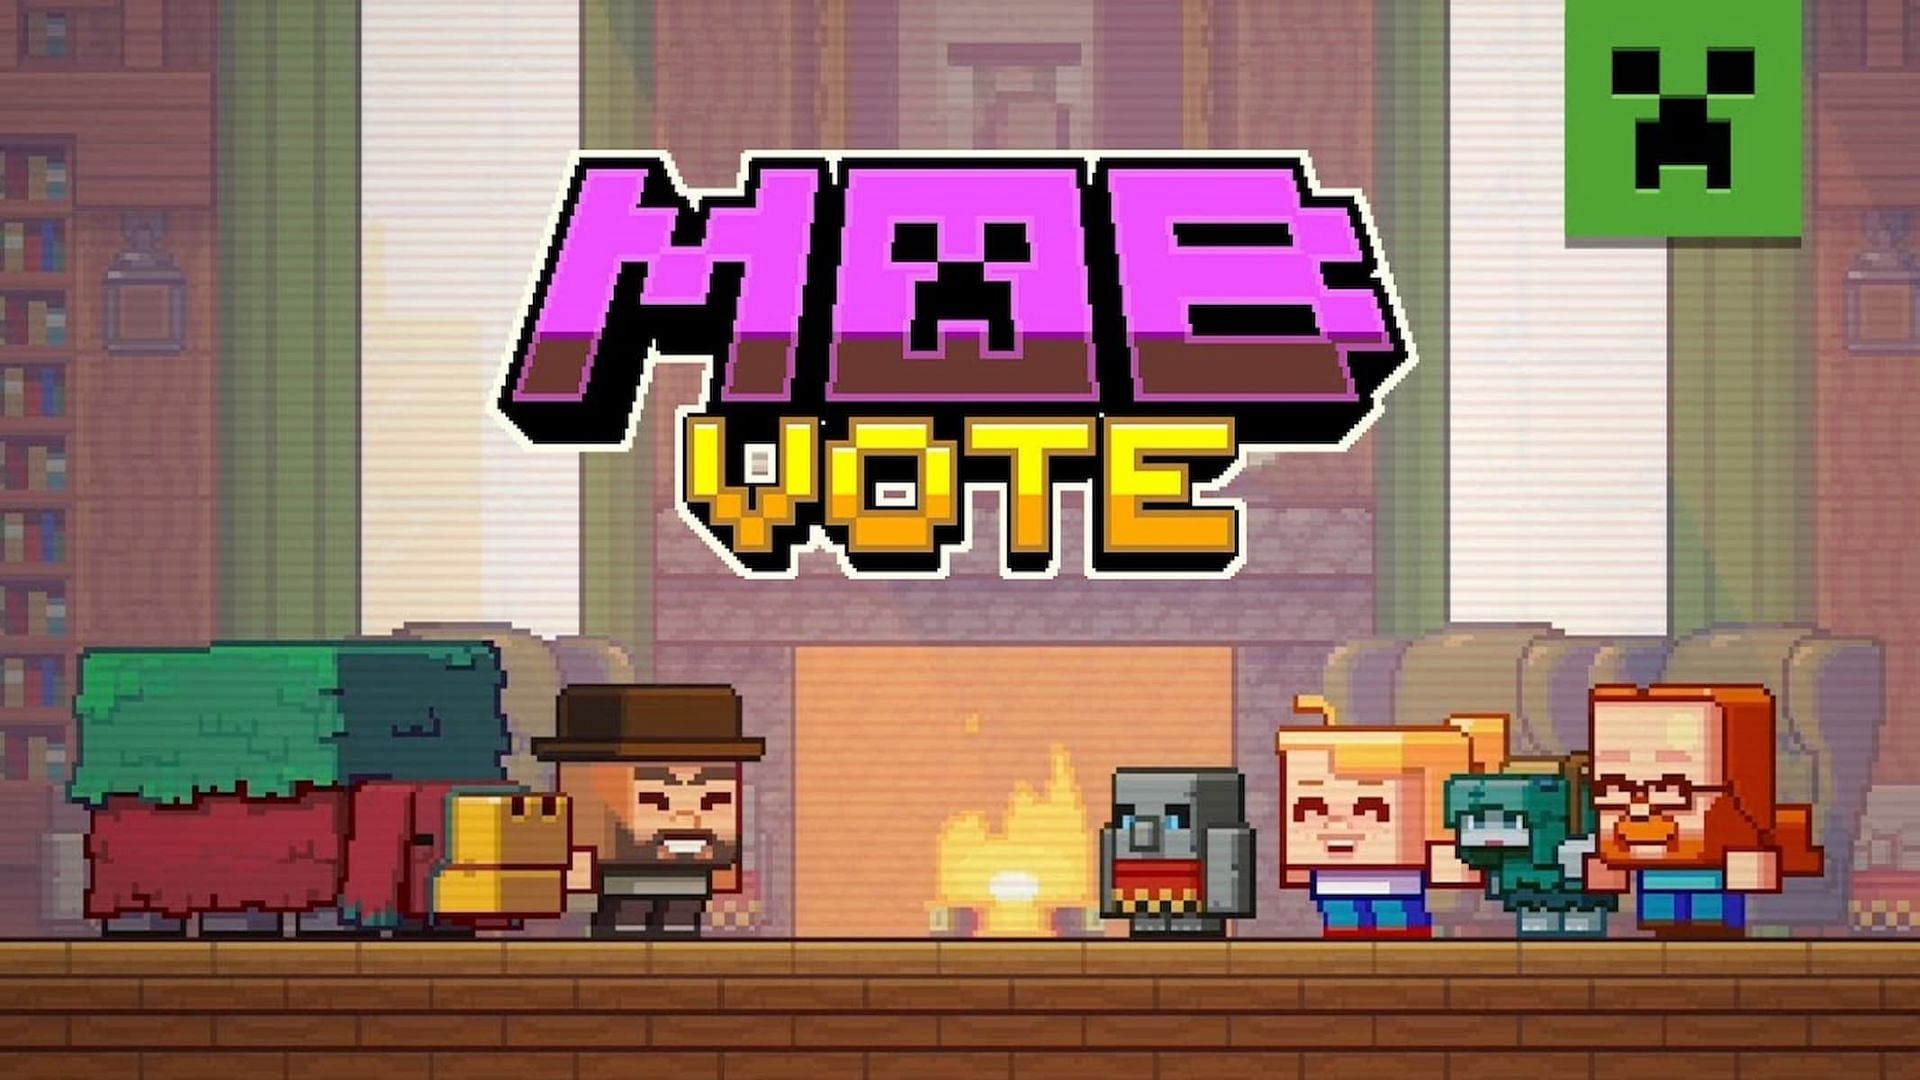 Minecraft mob vote 2022: when and where to cast your vote